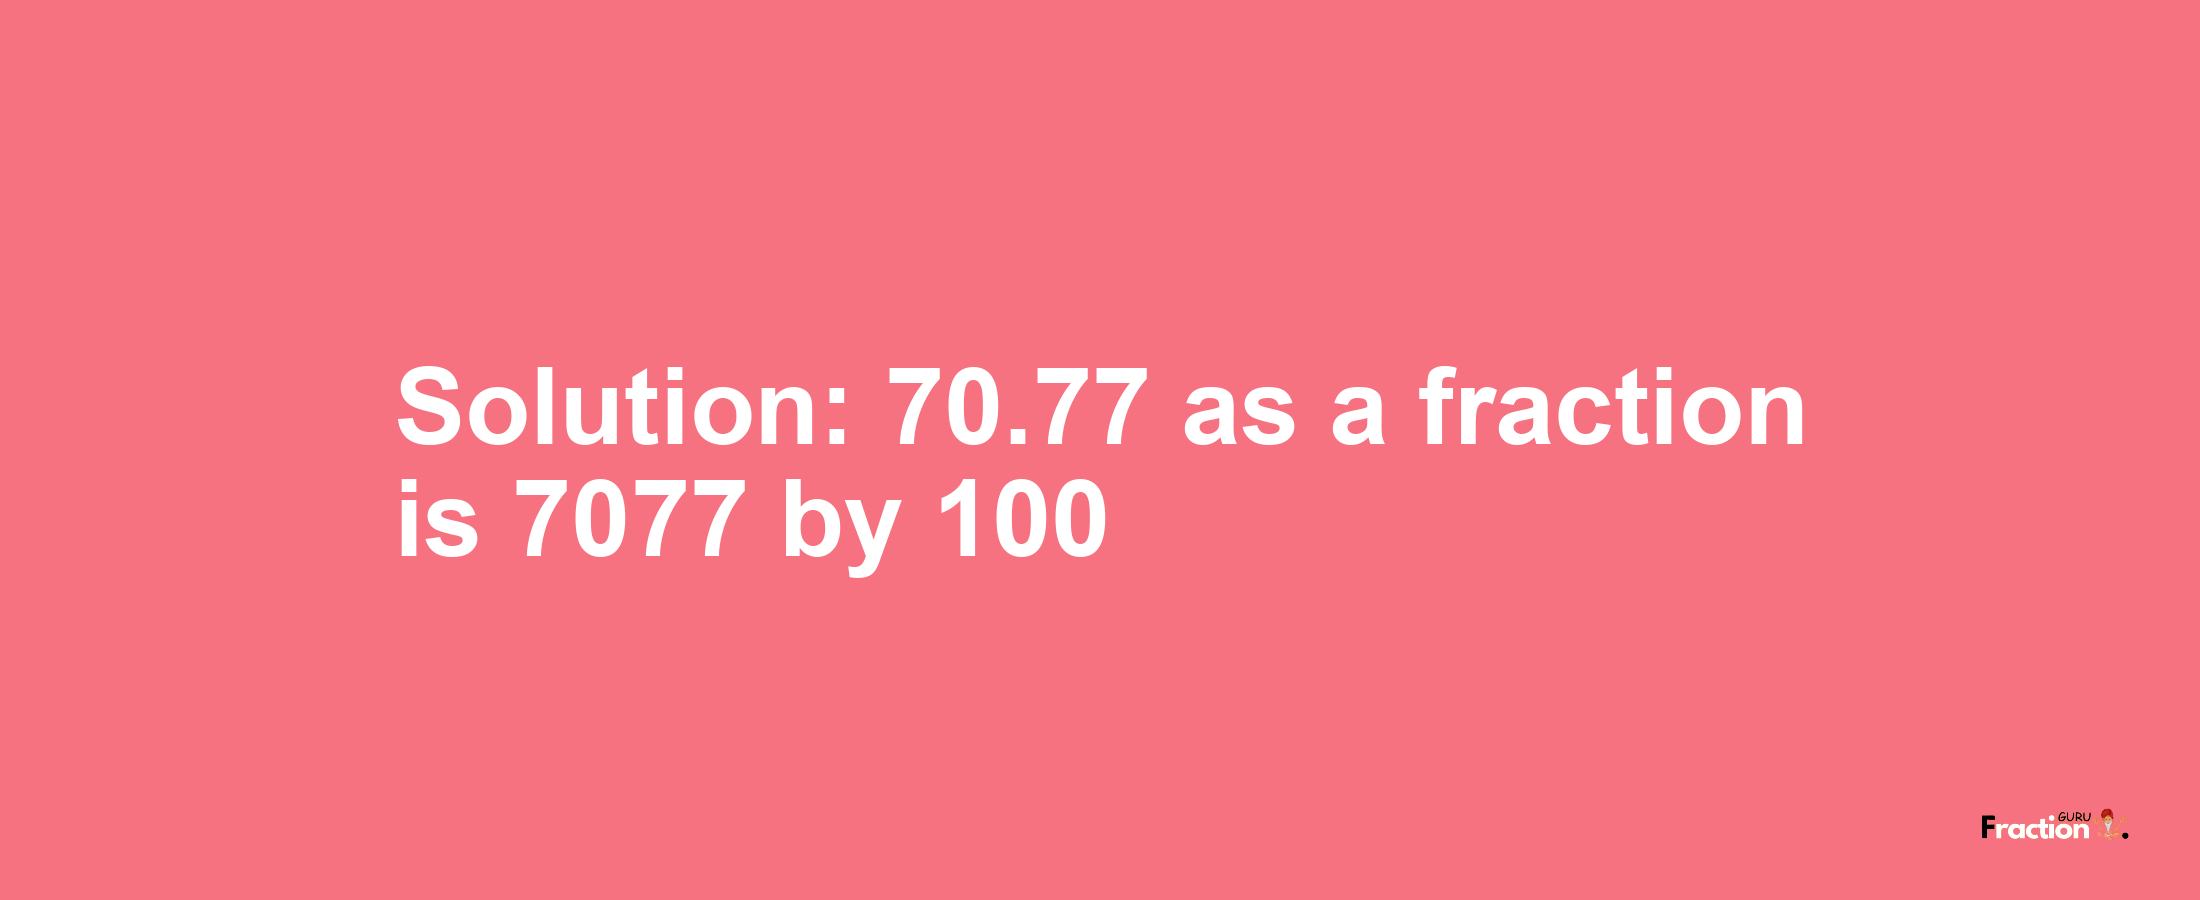 Solution:70.77 as a fraction is 7077/100